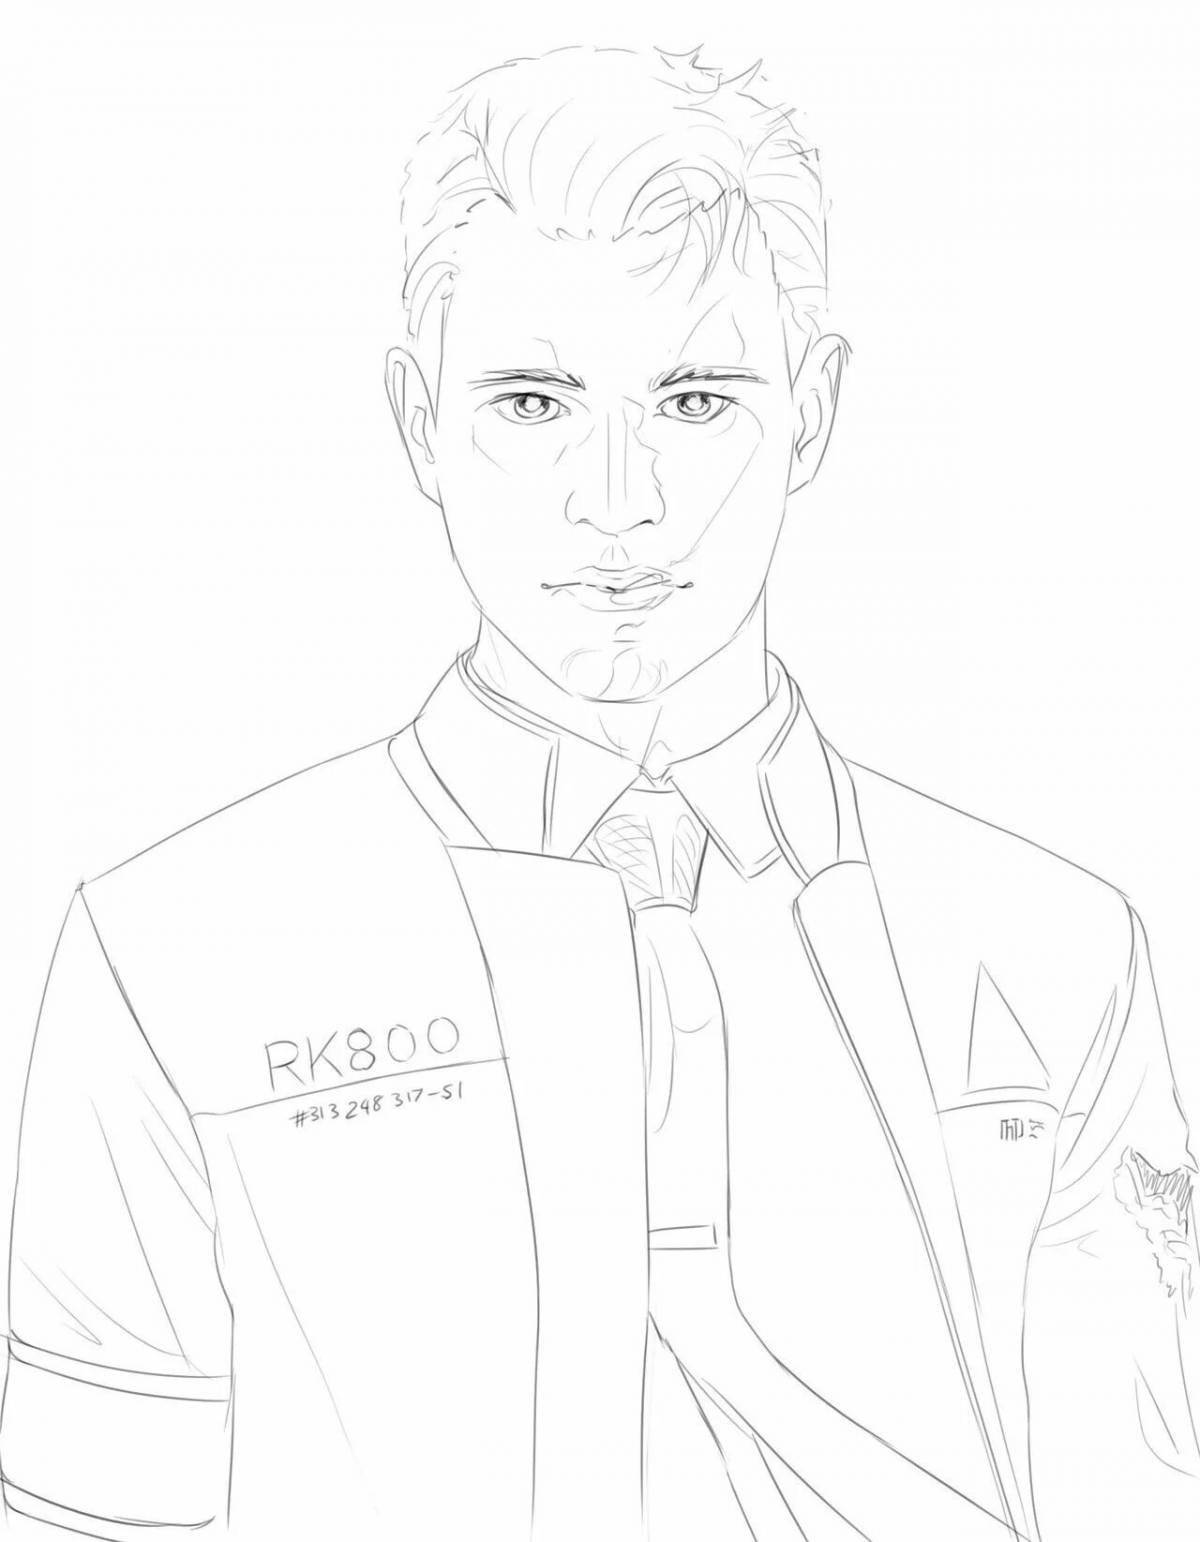 Gorgeous detroit become human coloring book